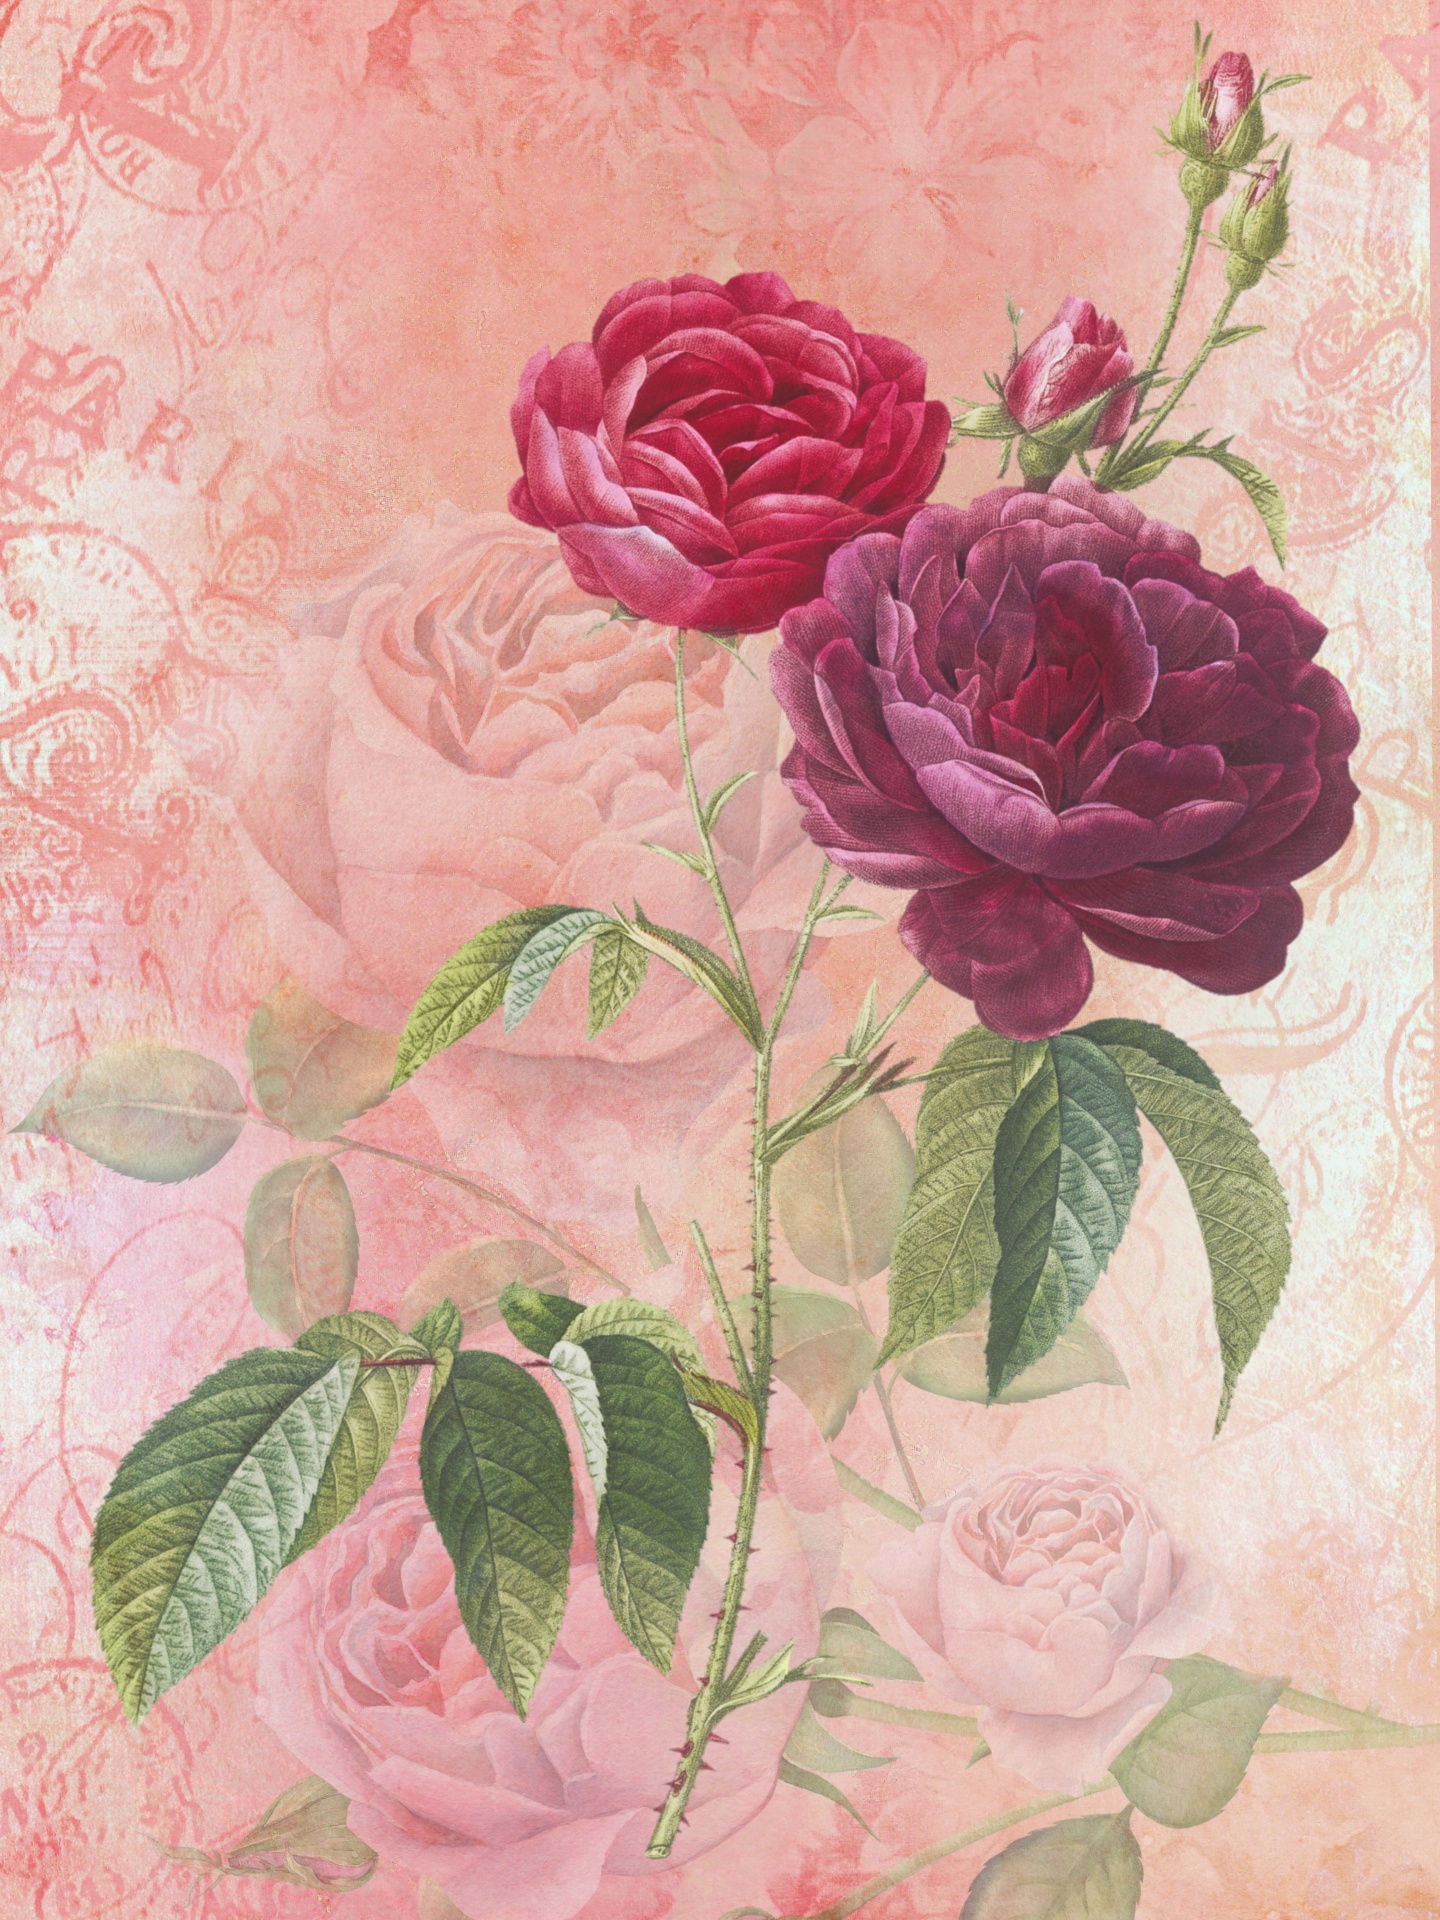 Rose Vintage Floral Background Free Stock Photo - Public Domain Pictures